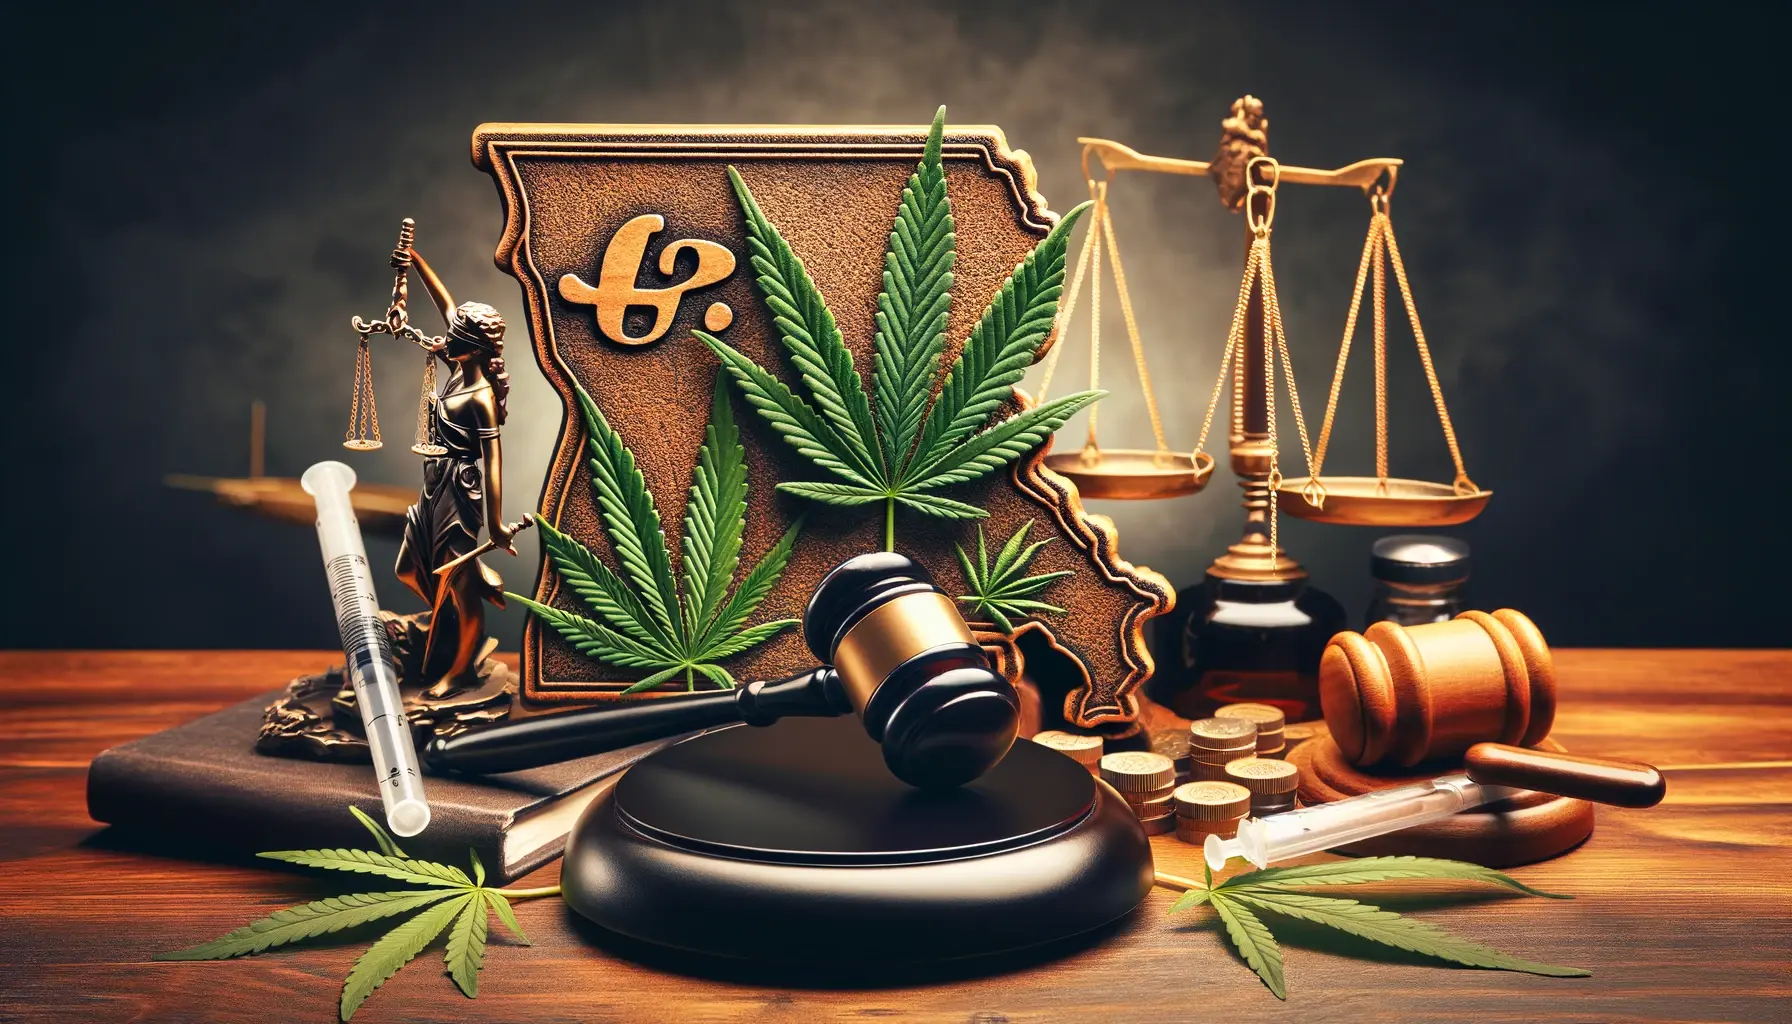 A 16:9 featured image depicting the topic of Delta 8 THC legality in Louisiana. The image should include elements symbolizing law, such as a gavel or scales of justice, intertwined with representations of Delta 8 pens and hemp leaves, set against a backdrop that suggests Louisiana, like a silhouette of the state or iconic landmarks. The overall tone should be professional and informative, appealing to an audience interested in legal and cannabis topics.